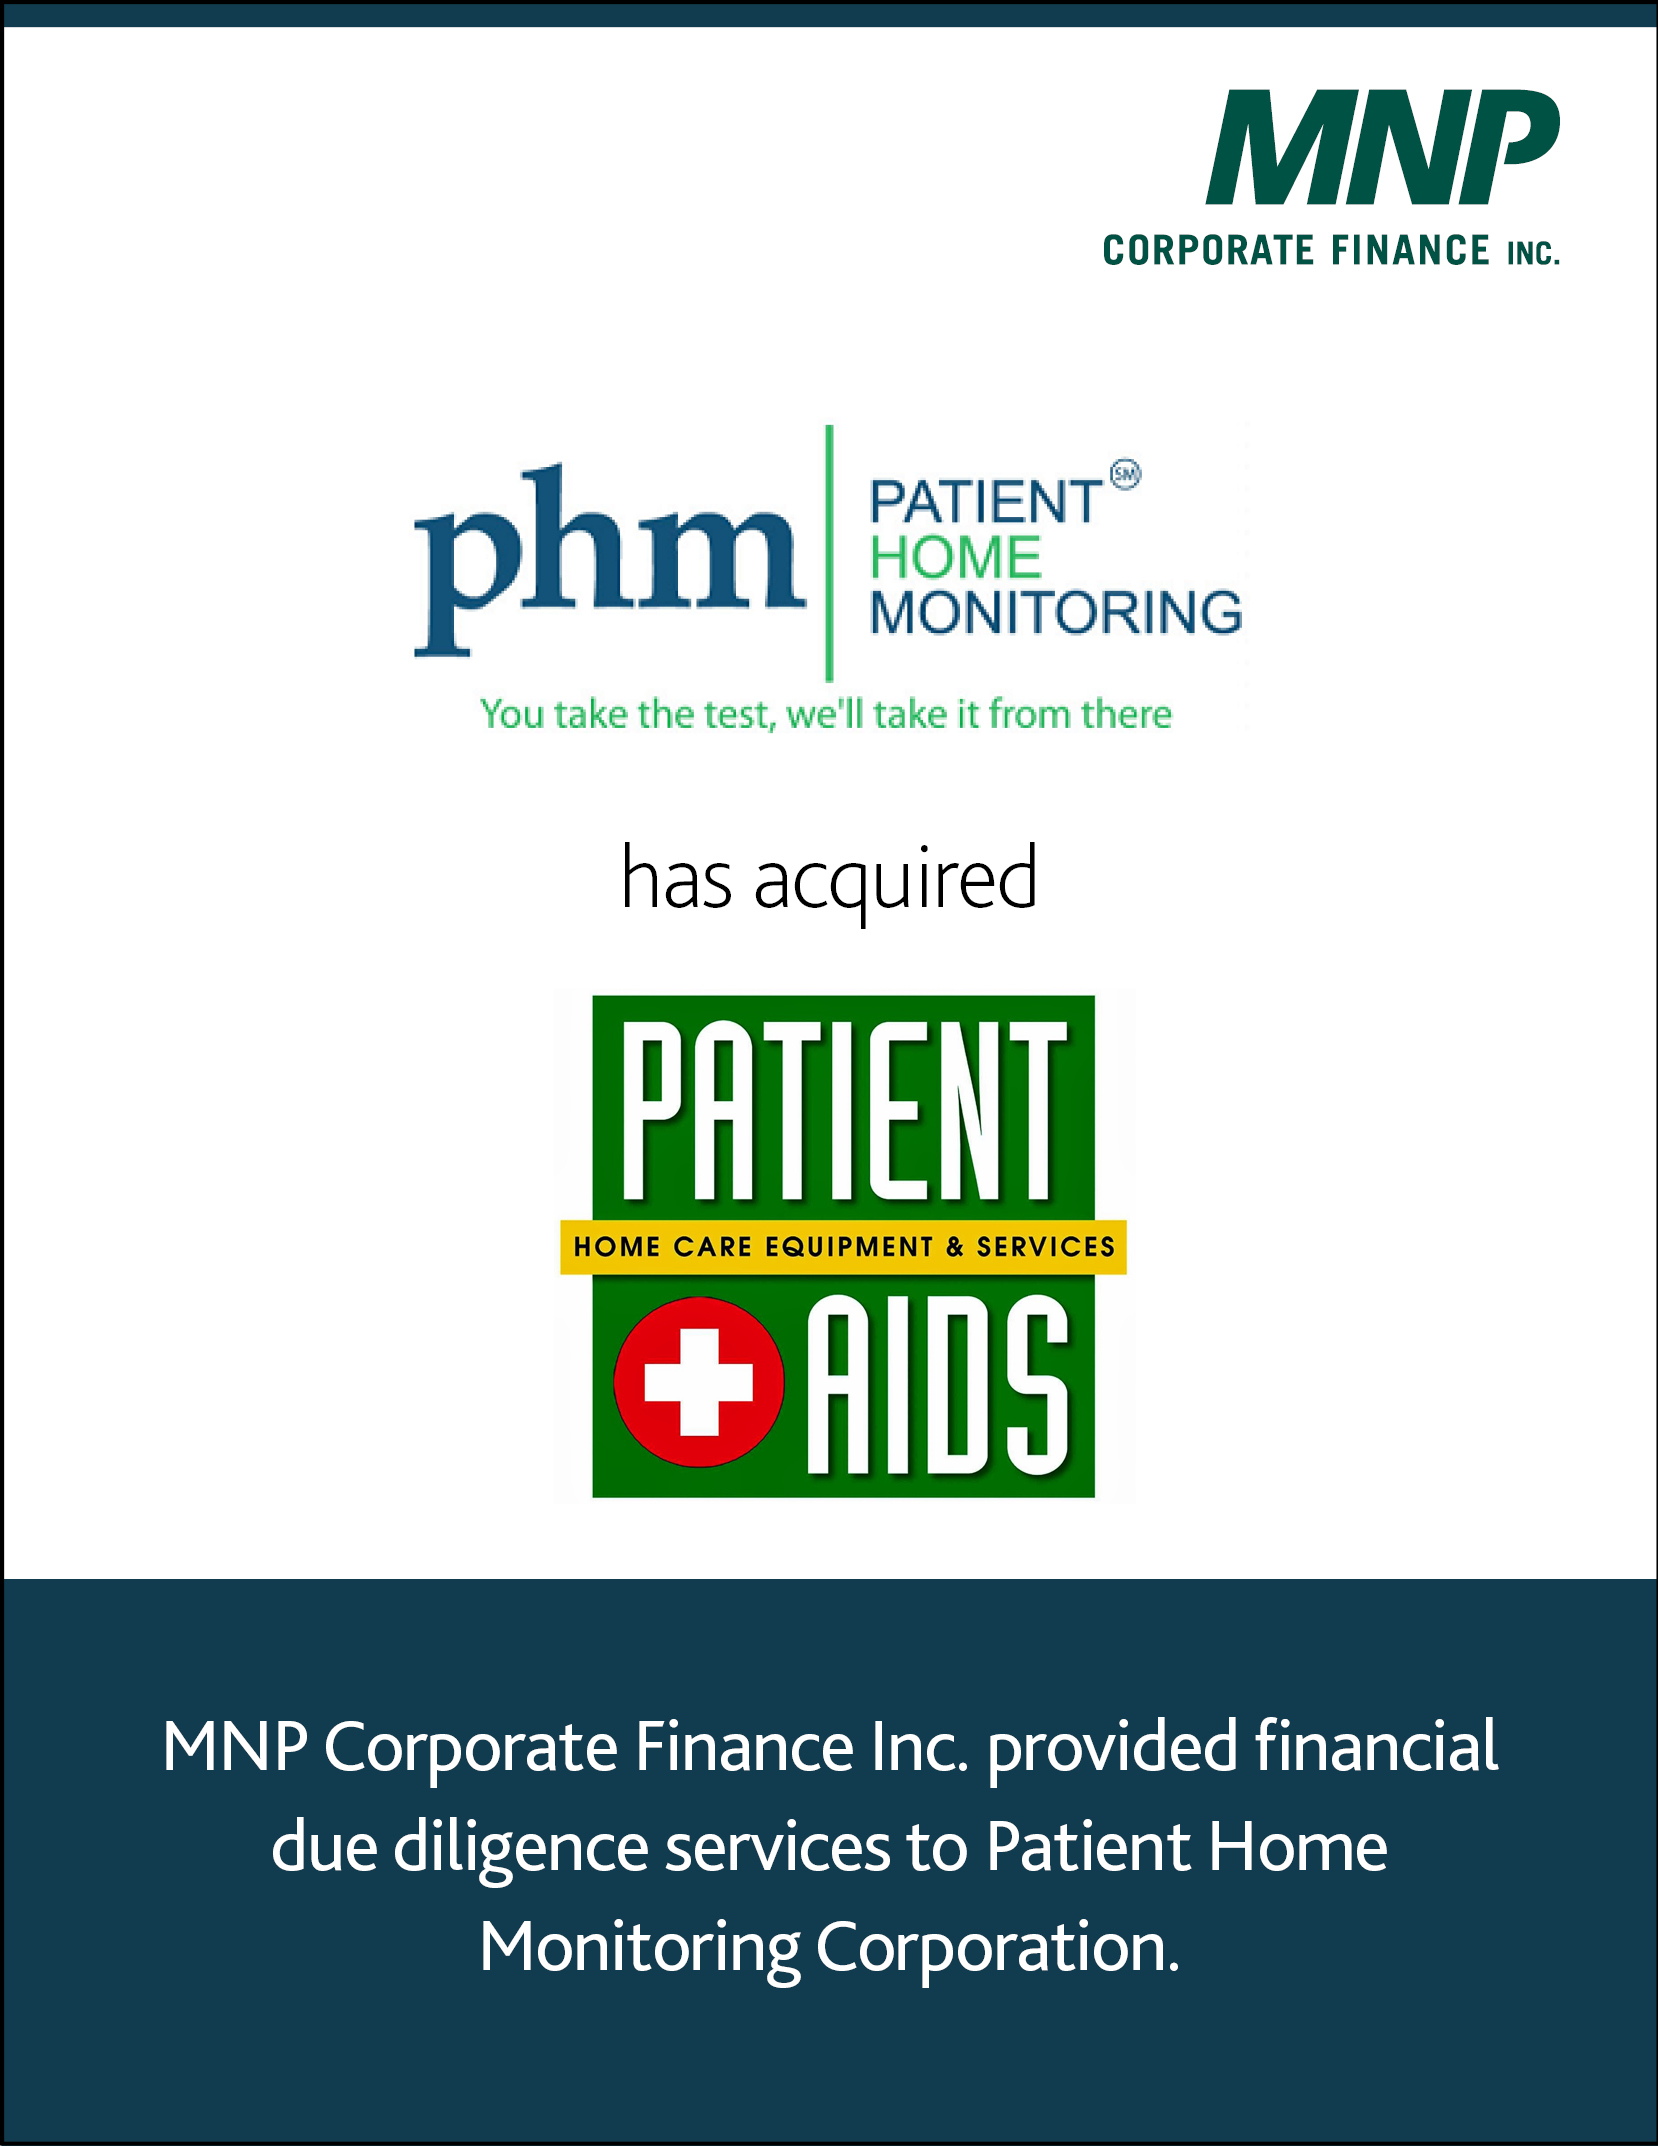 Patient Home Monitoring Corporation has acquired Patient-Aids, Inc. in Ohio.